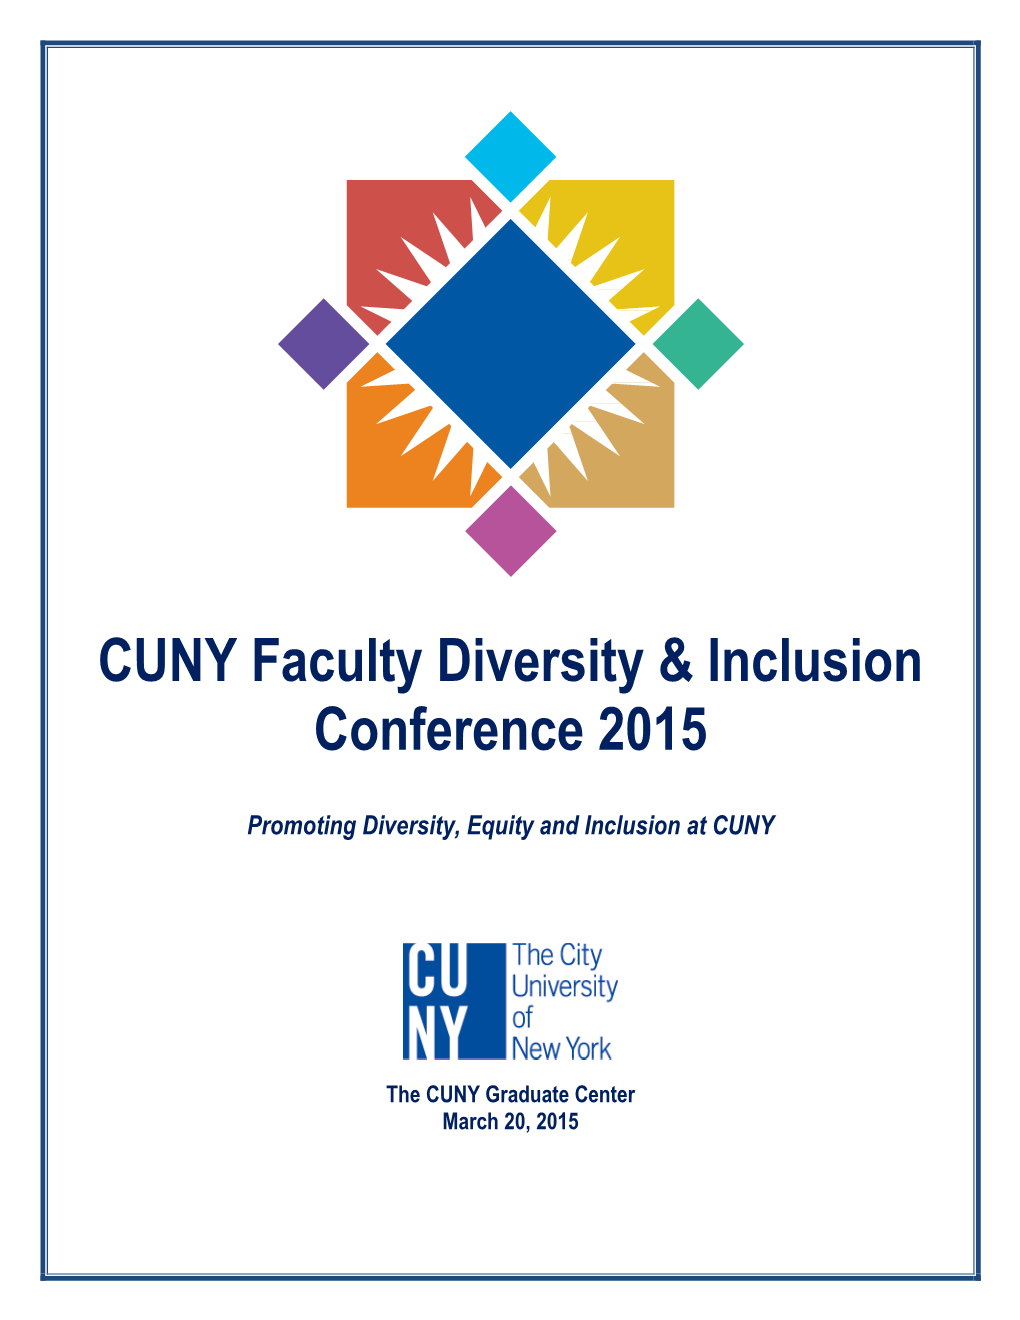 CUNY Faculty Diversity & Inclusion Conference 2015